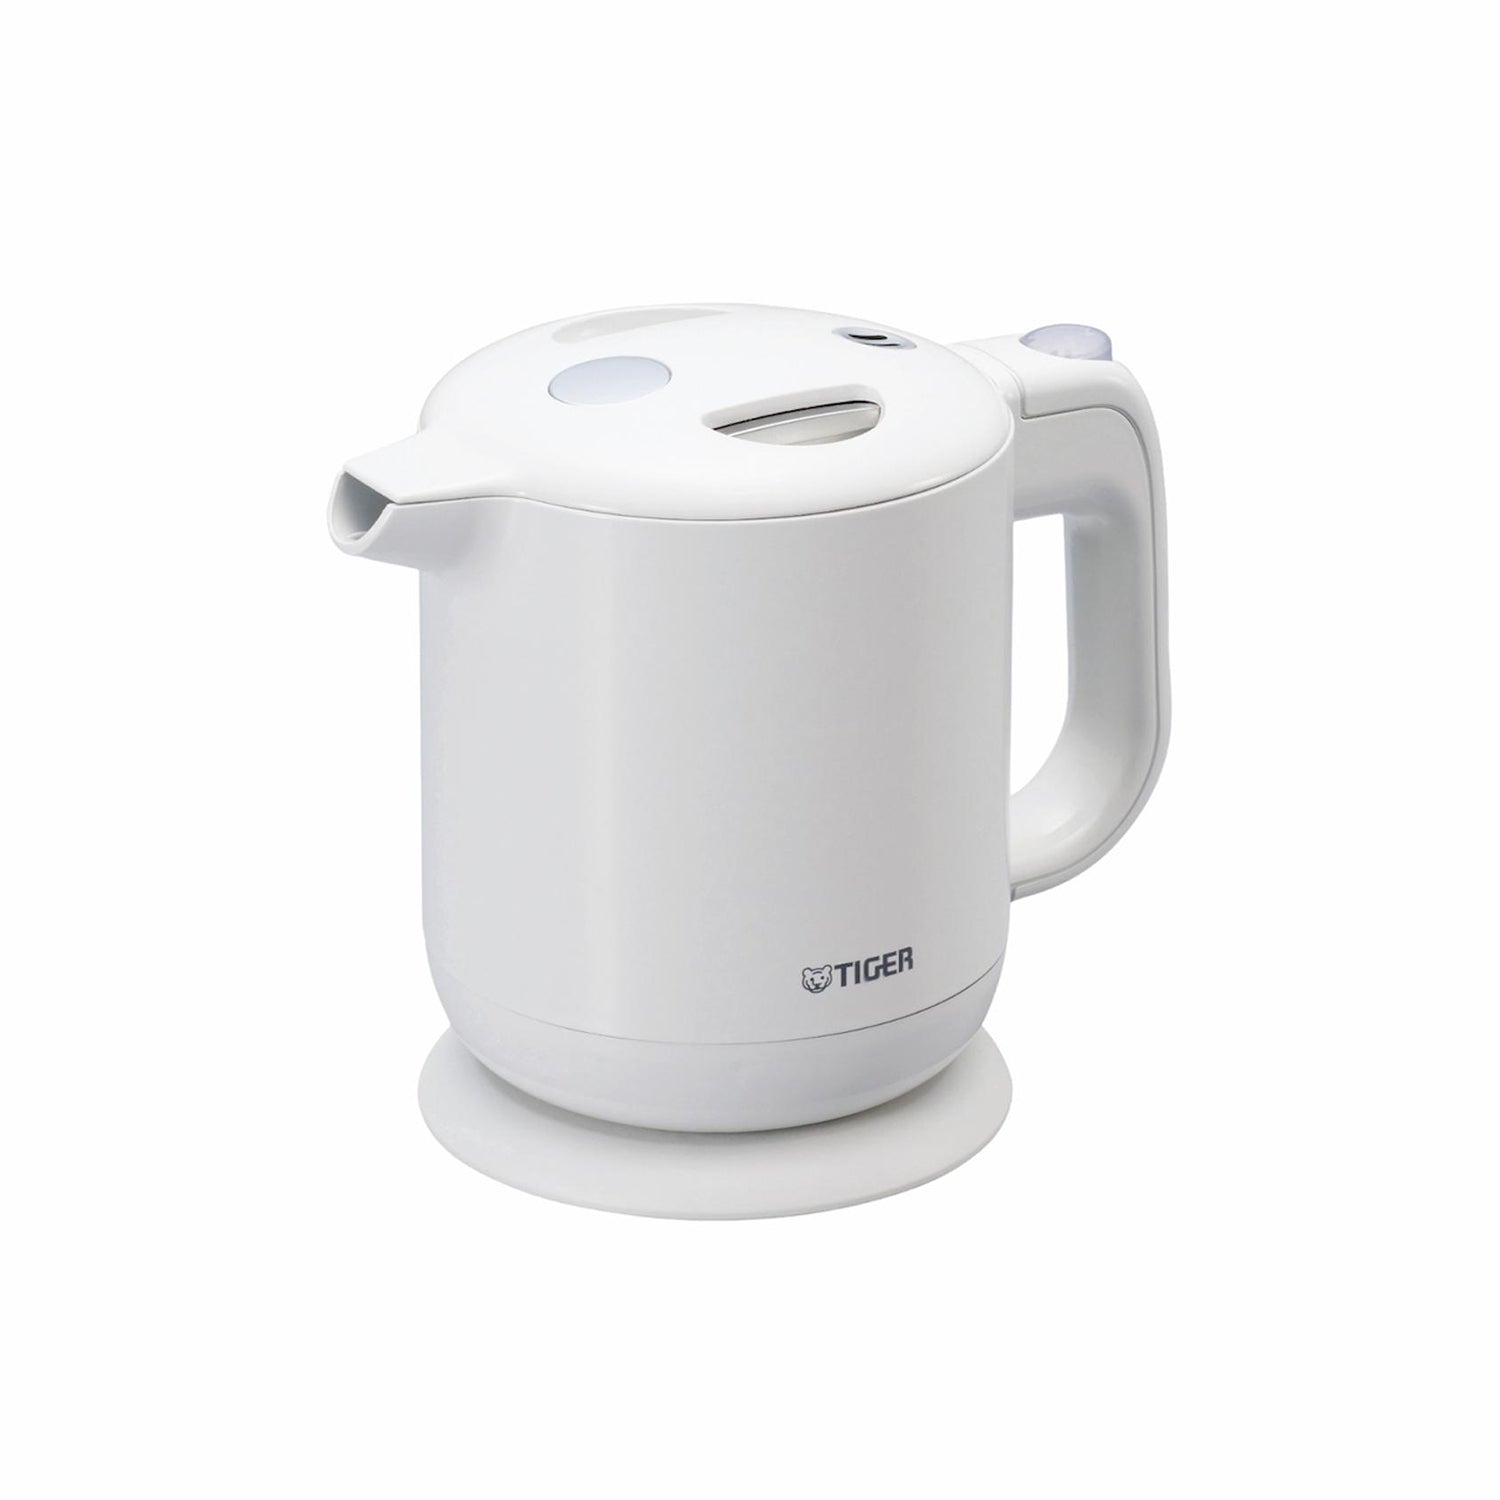 Tiger Japan Auto Shut Electric Kettle Double wall 1 Ltr White